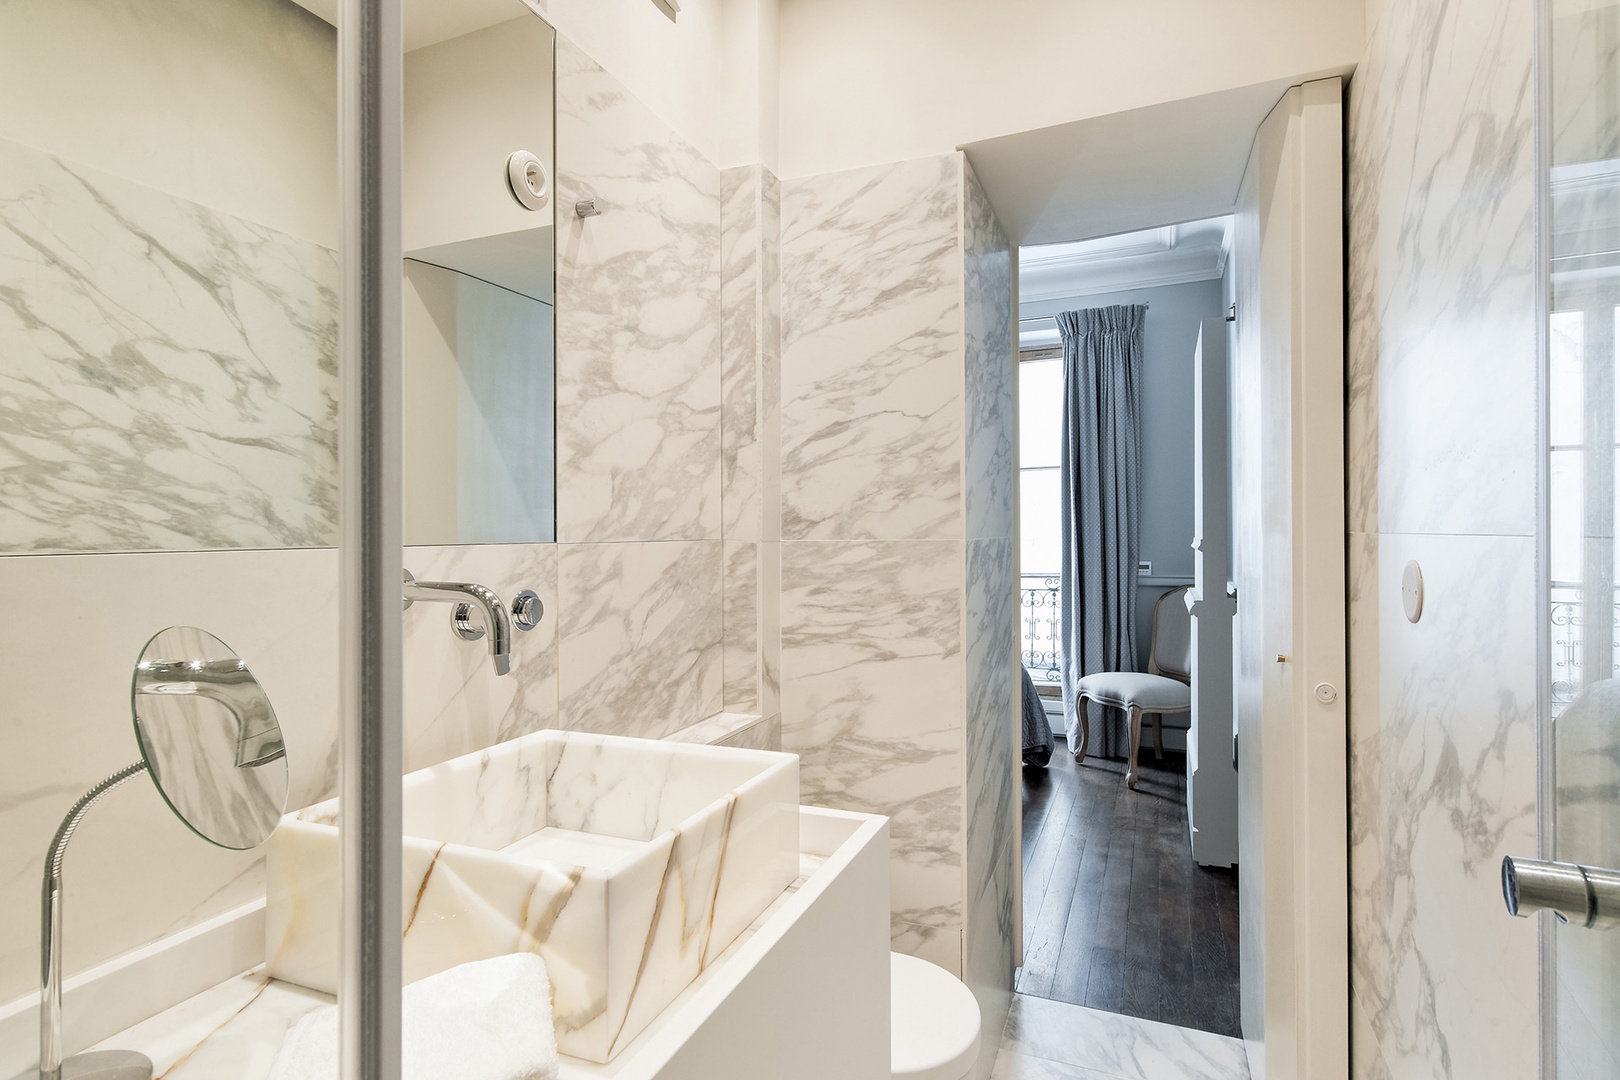 Pamper yourself in the luxurious marble bathroom.